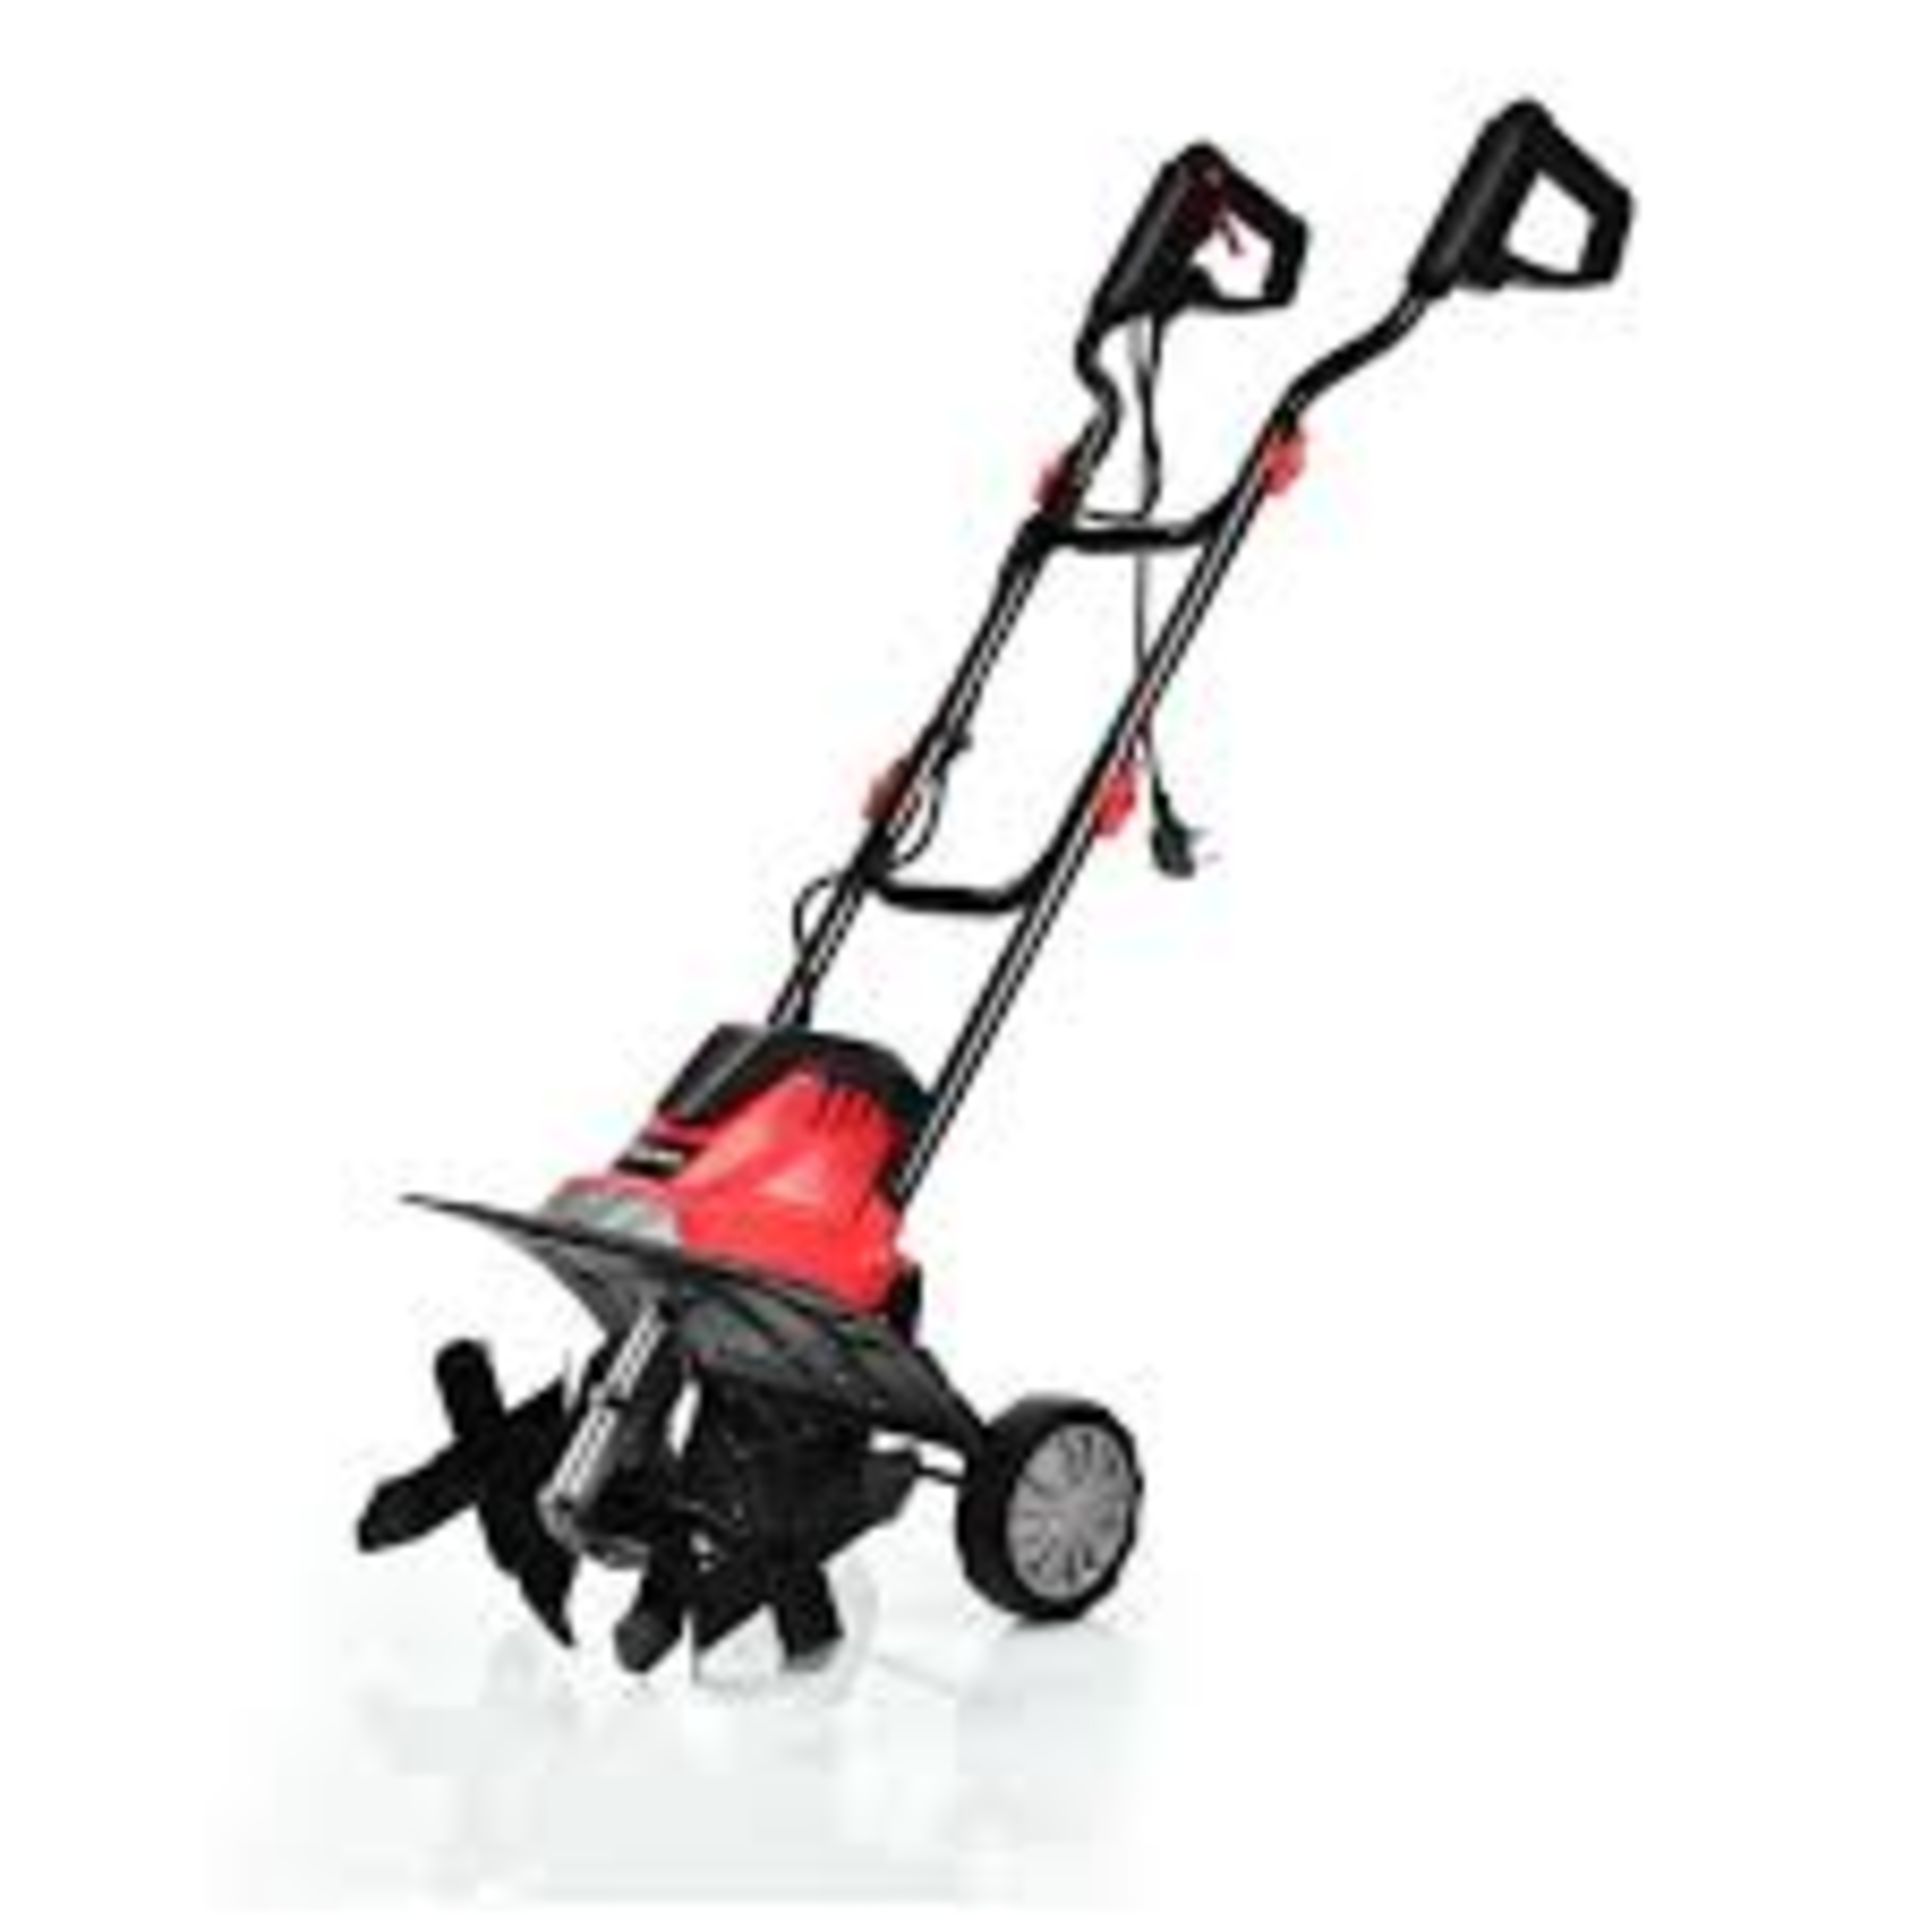 1200W Electric Garden Tiller/Cultivator with 4 Blade Till. - R14.15. Are you still struggling with